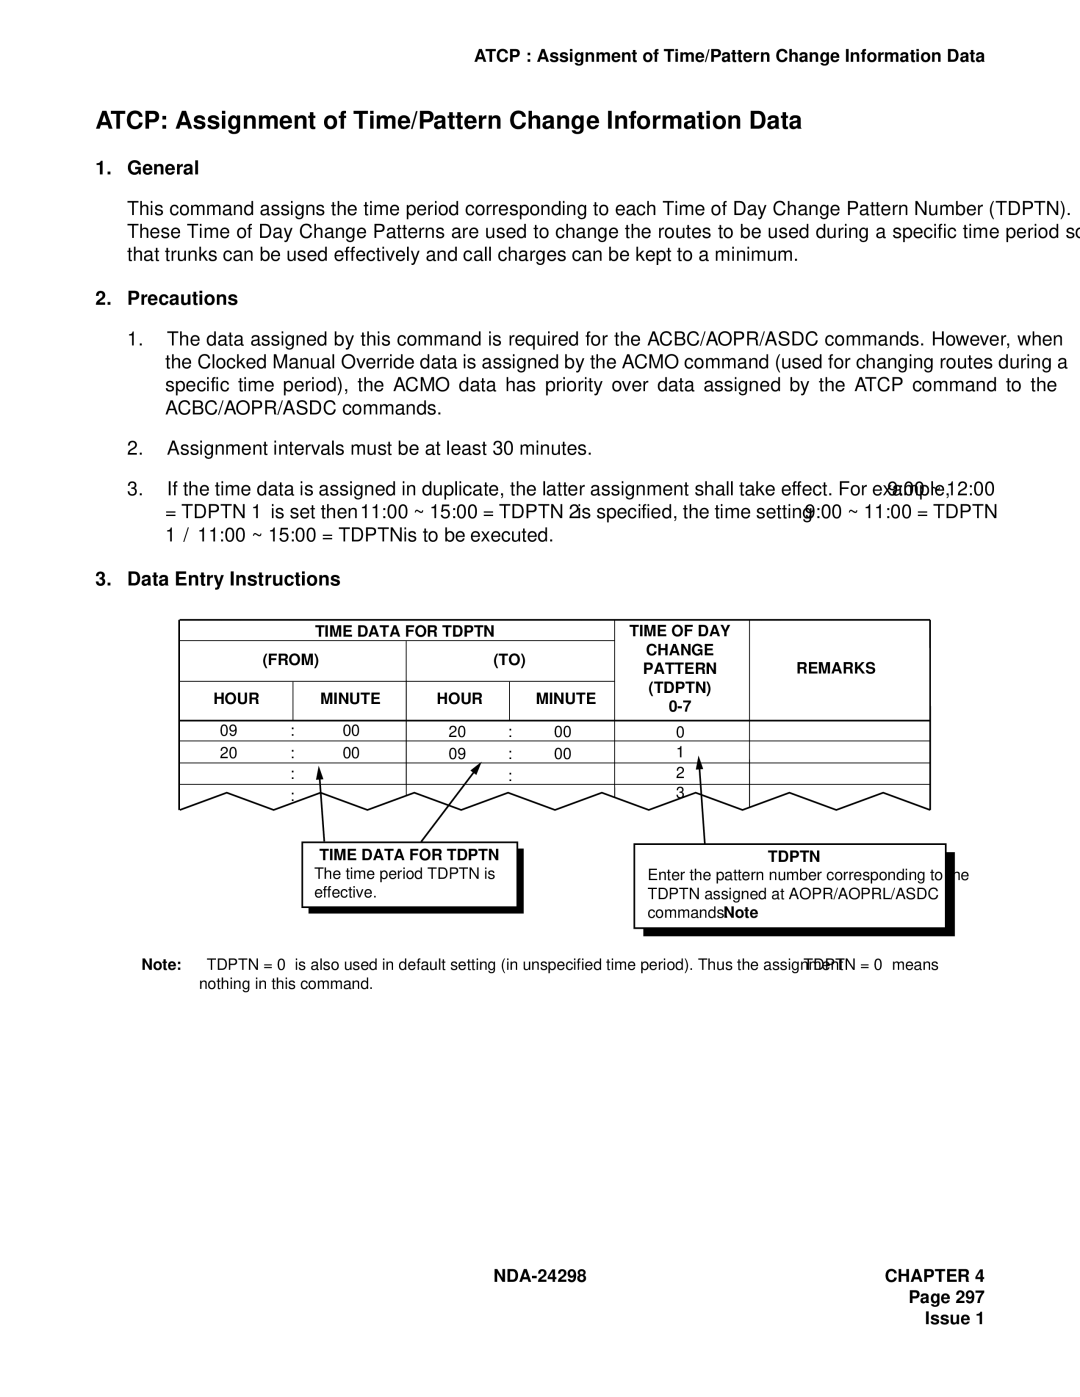 NEC NDA-24298 manual Atcp Assignment of Time/Pattern Change Information Data 